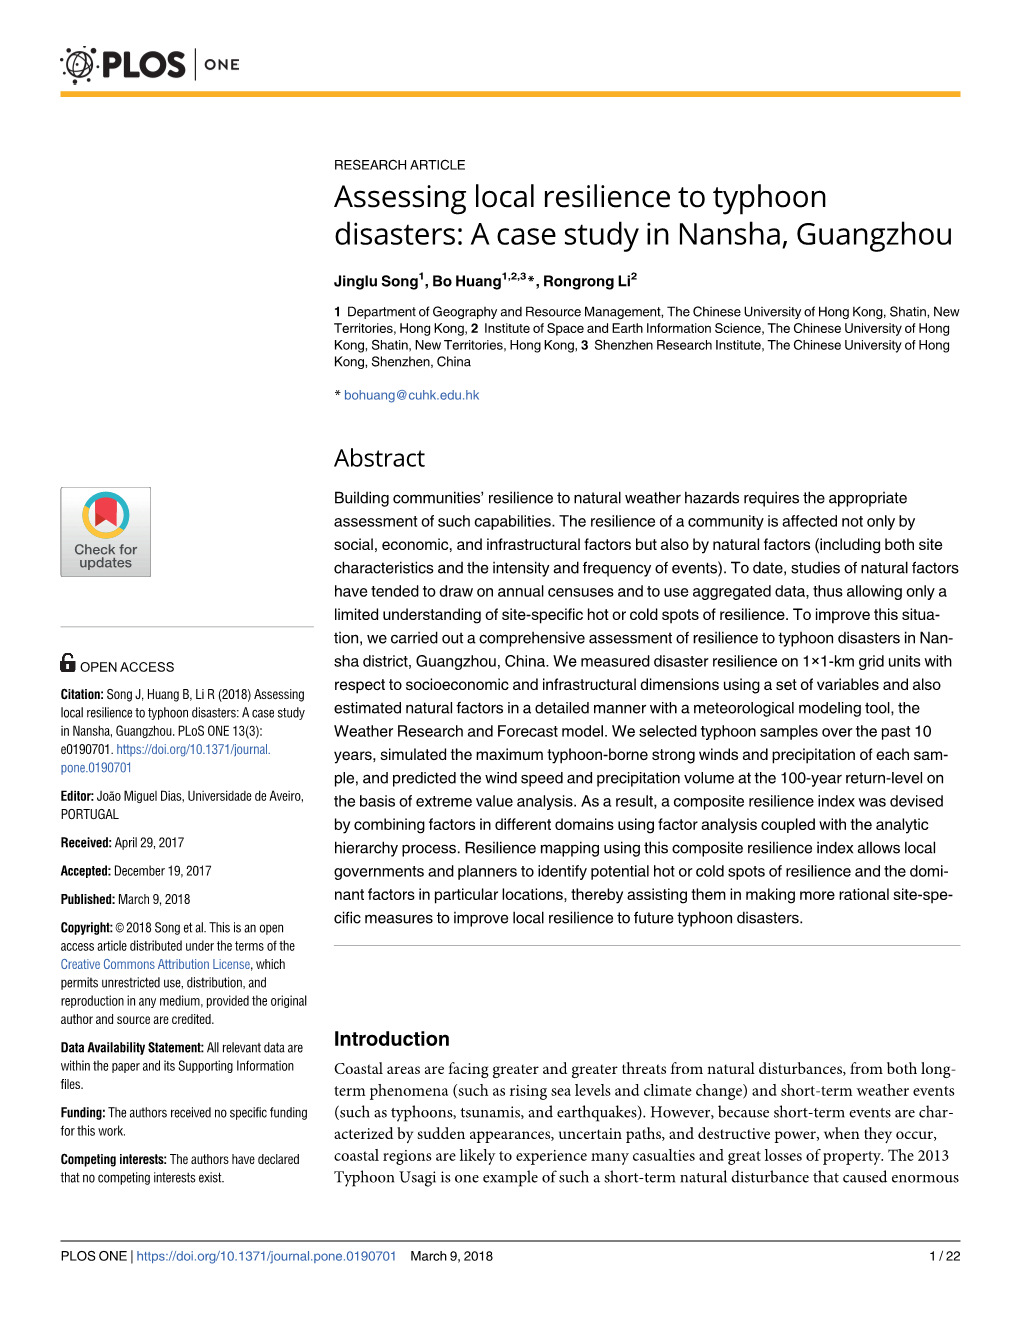 Assessing Local Resilience to Typhoon Disasters: a Case Study in Nansha, Guangzhou